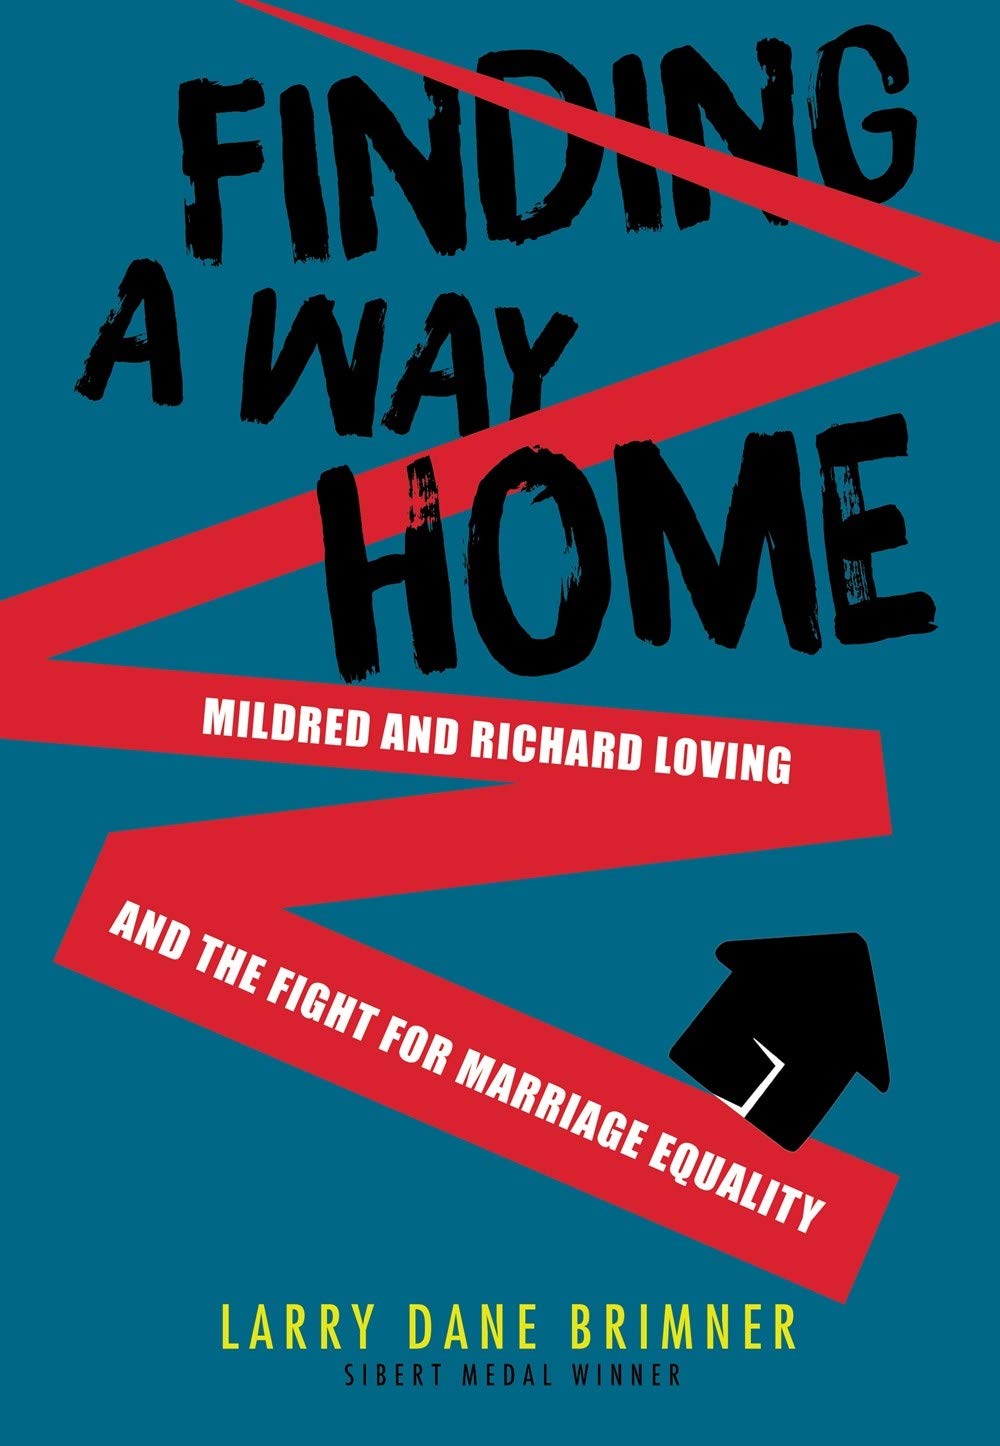 Finding a Way Home: Mildred and Richard Loving and the Fight for Marriage Equality